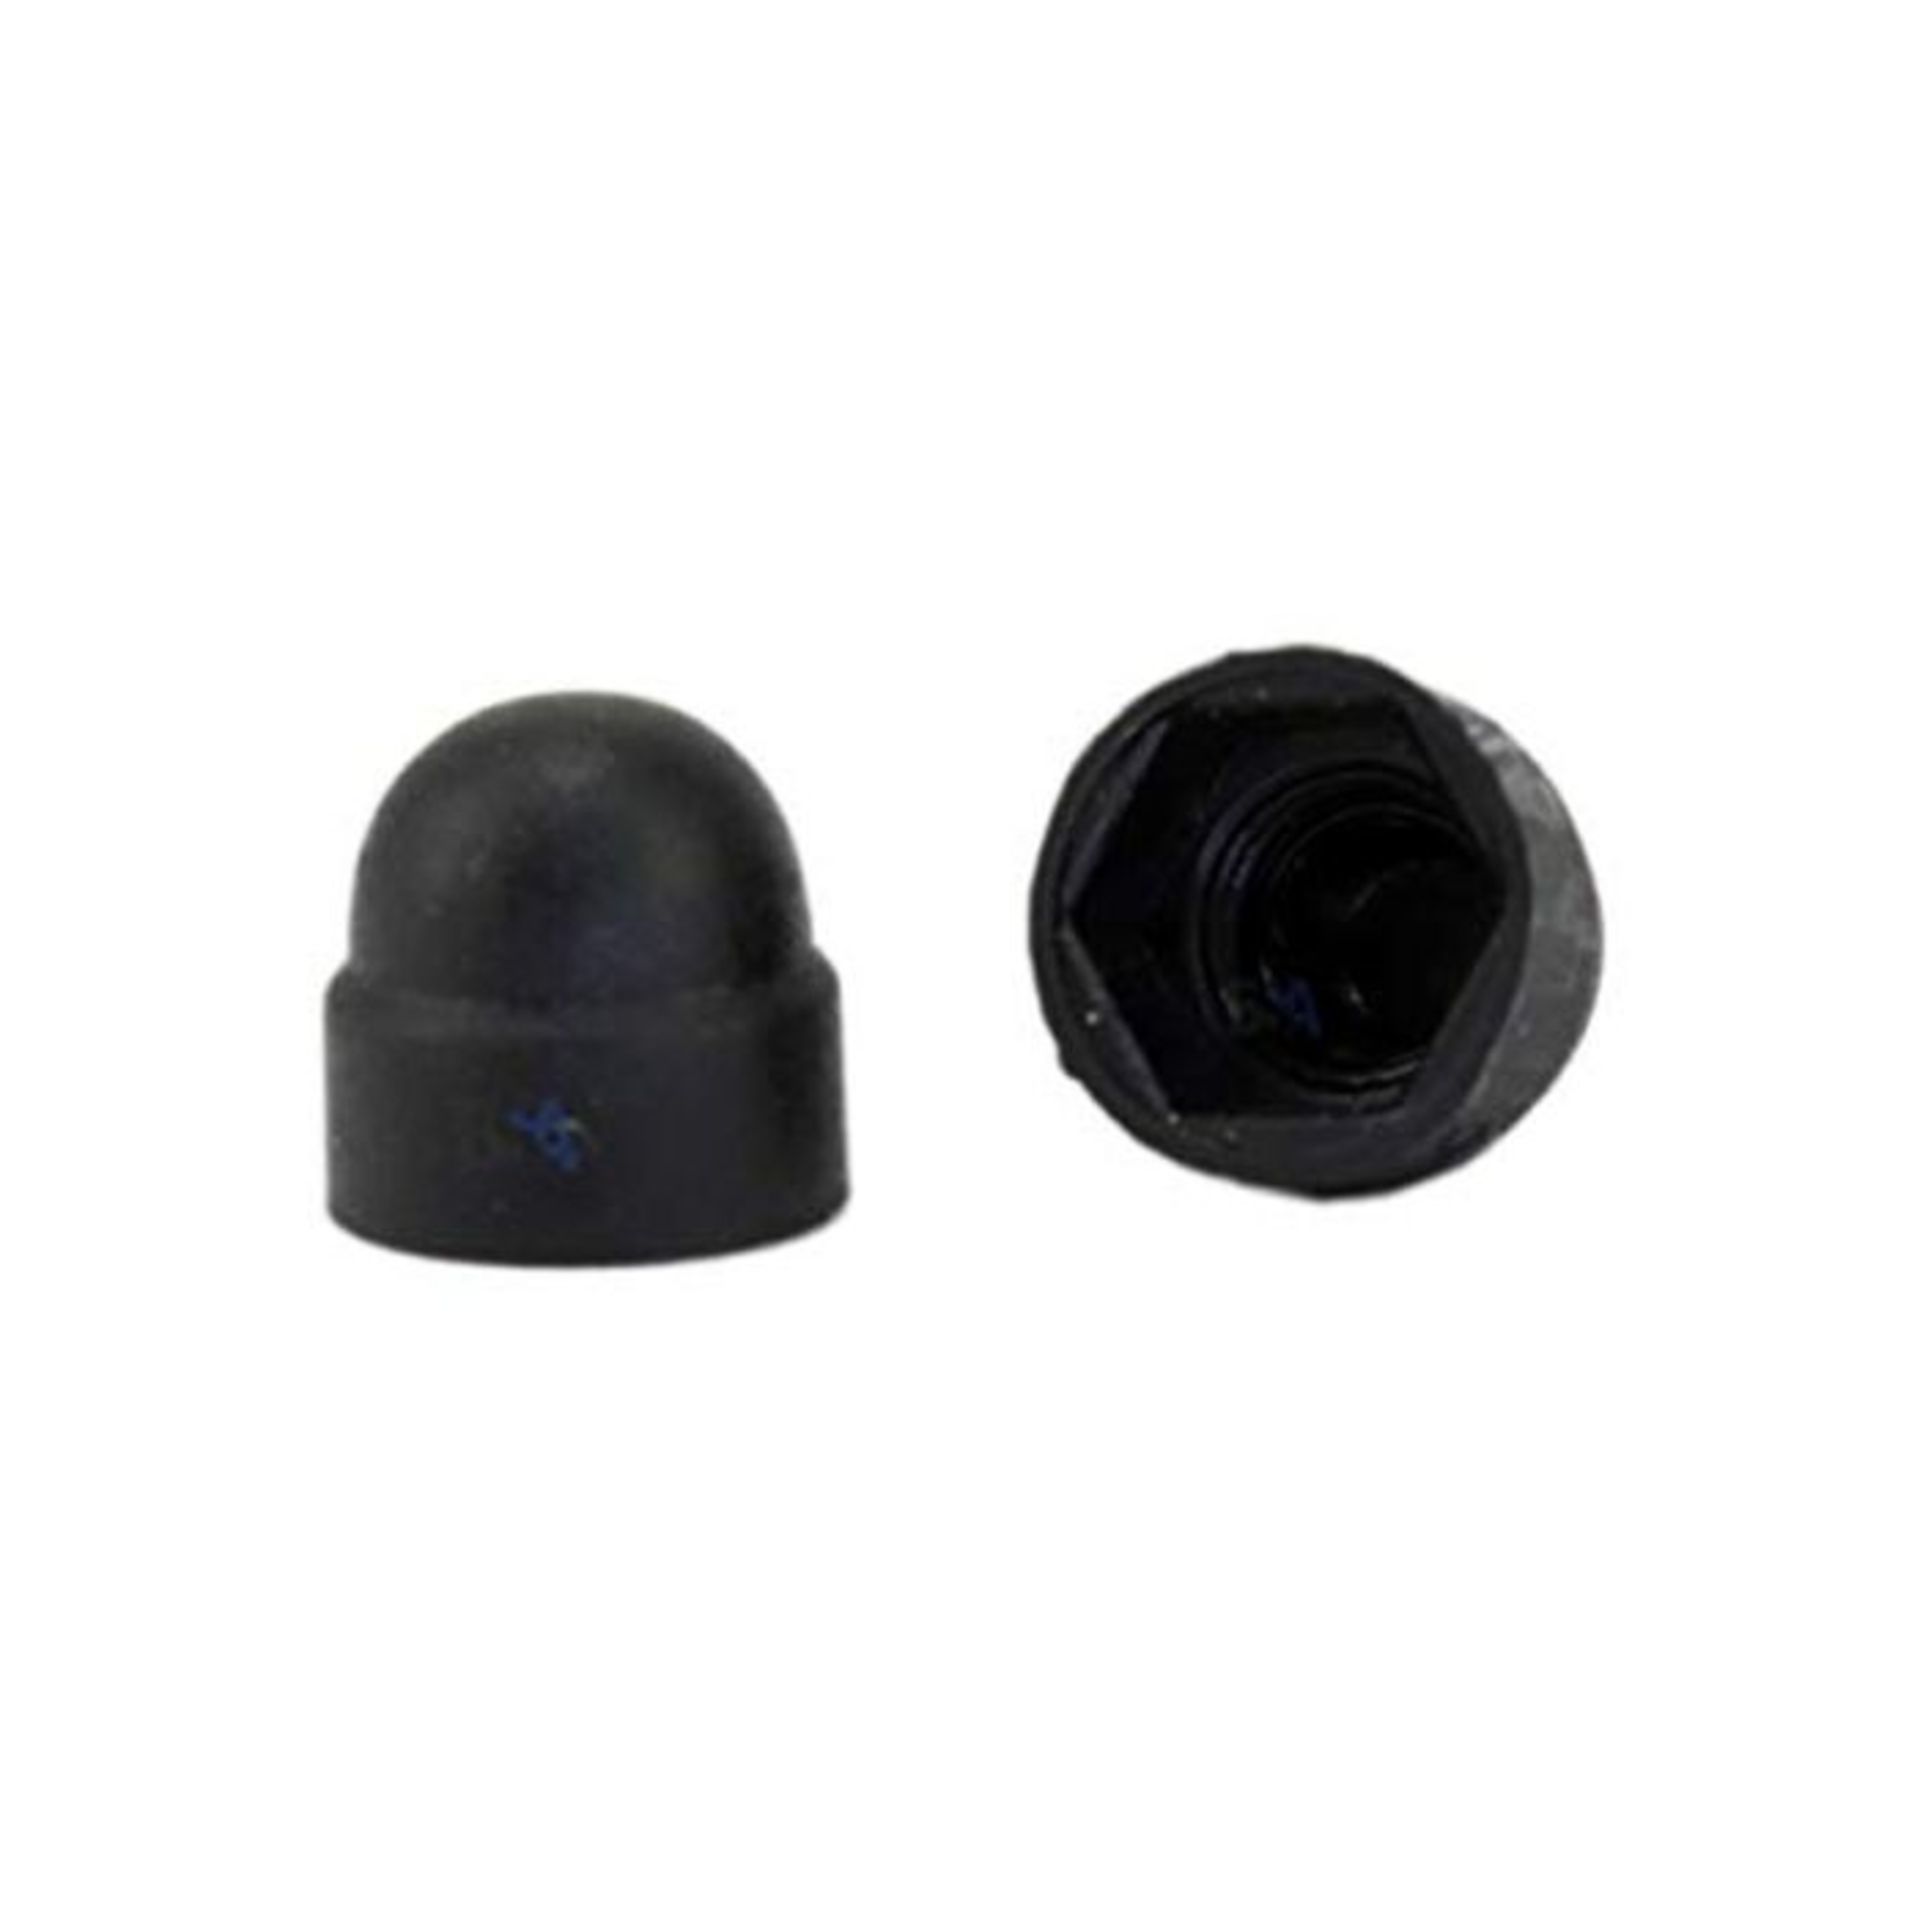 20 Cover Caps for Hex Bolts and Nuts M4 WURTH 059004 Black RAL 9005 Black Height 7.6 m